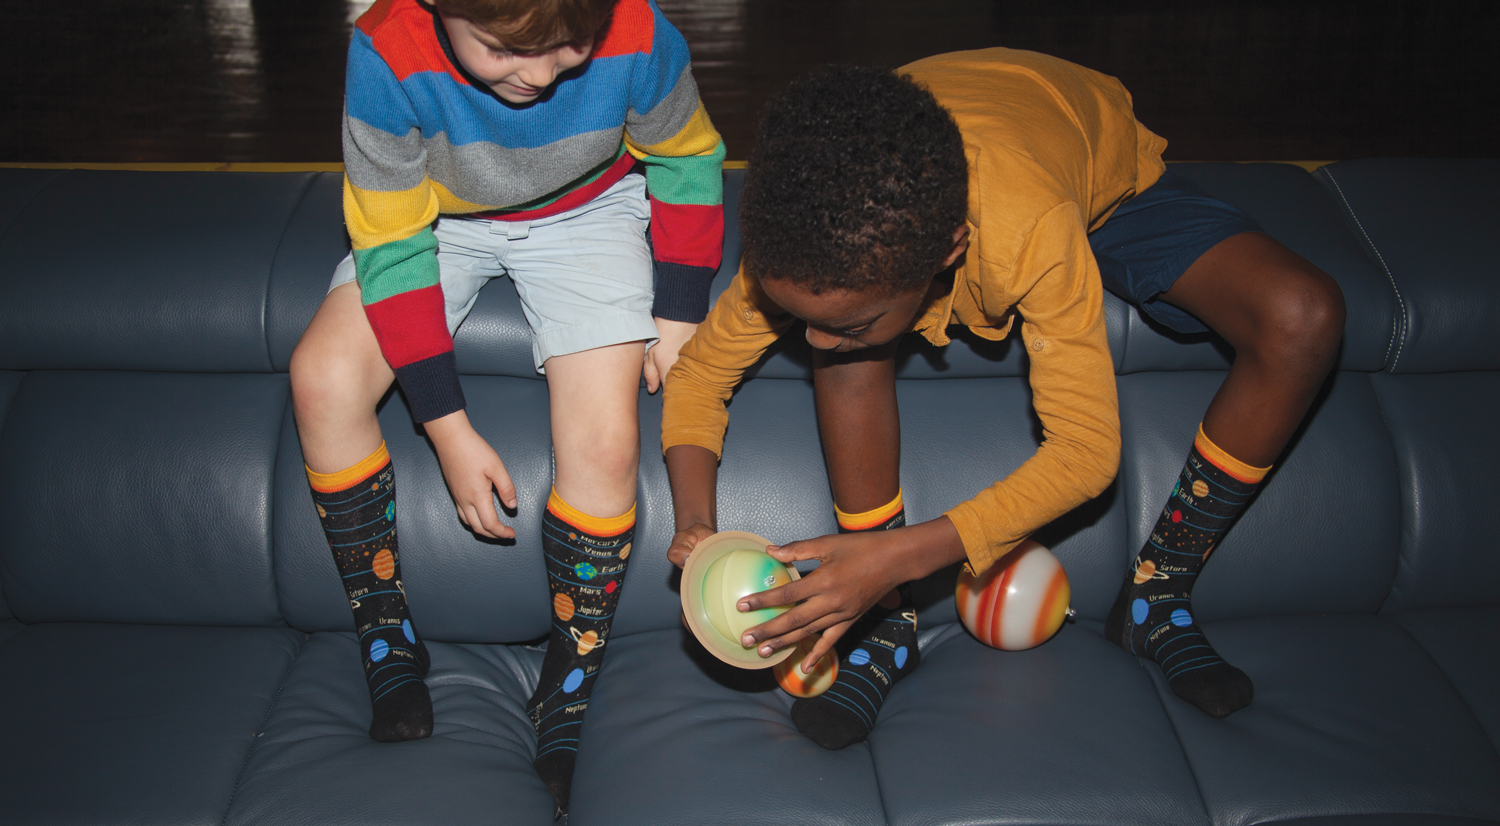 Two little boys wearing bright, fun clothes and matching kids planets socks, playing with miniature planet balls on a couch.